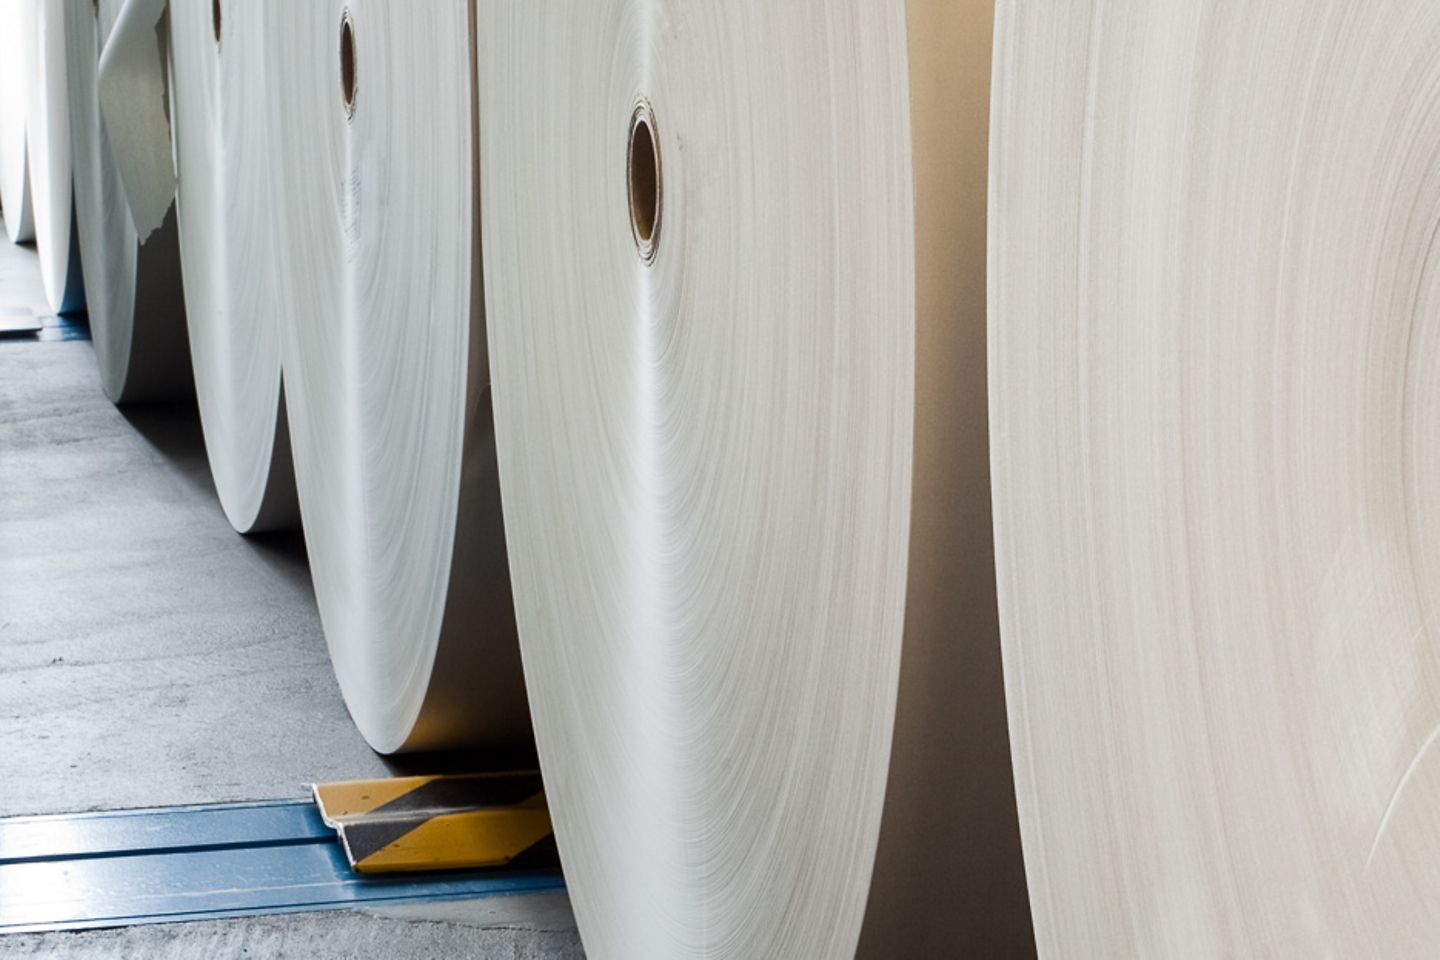 Close-up of several large paper rolls in a room